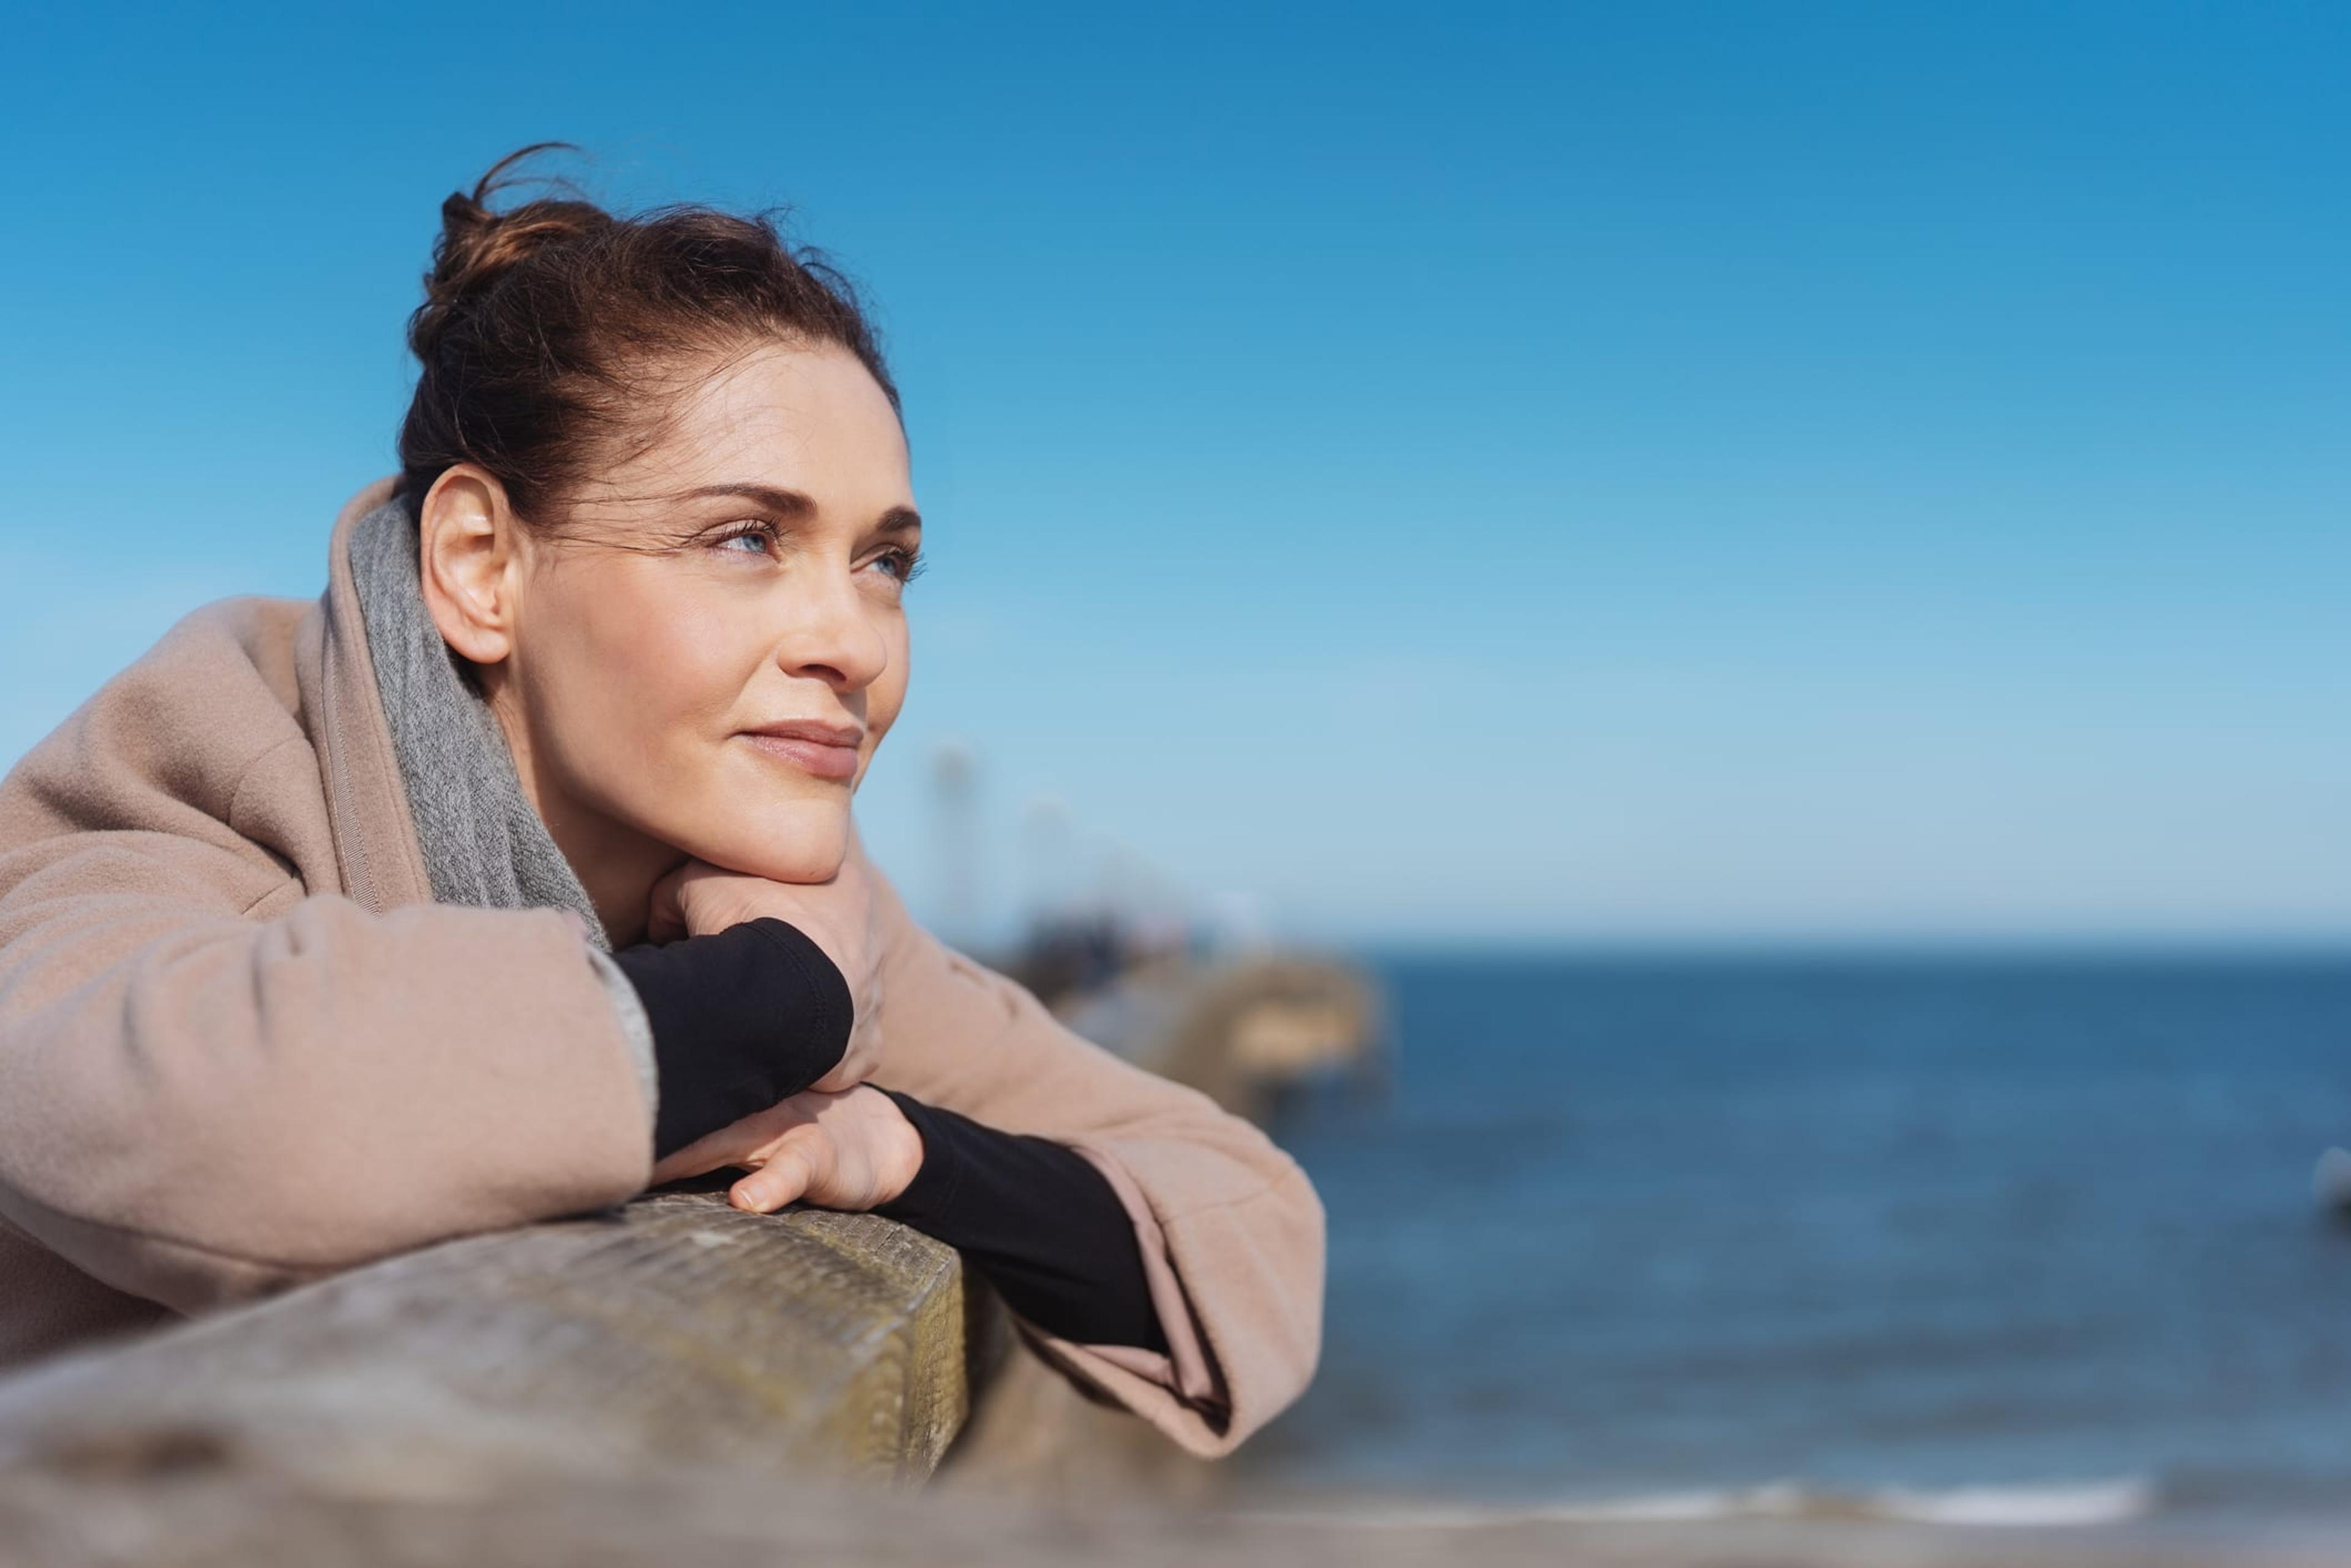 A woman dealing with stress and anxiety leaning over a pier and staring off into the distance